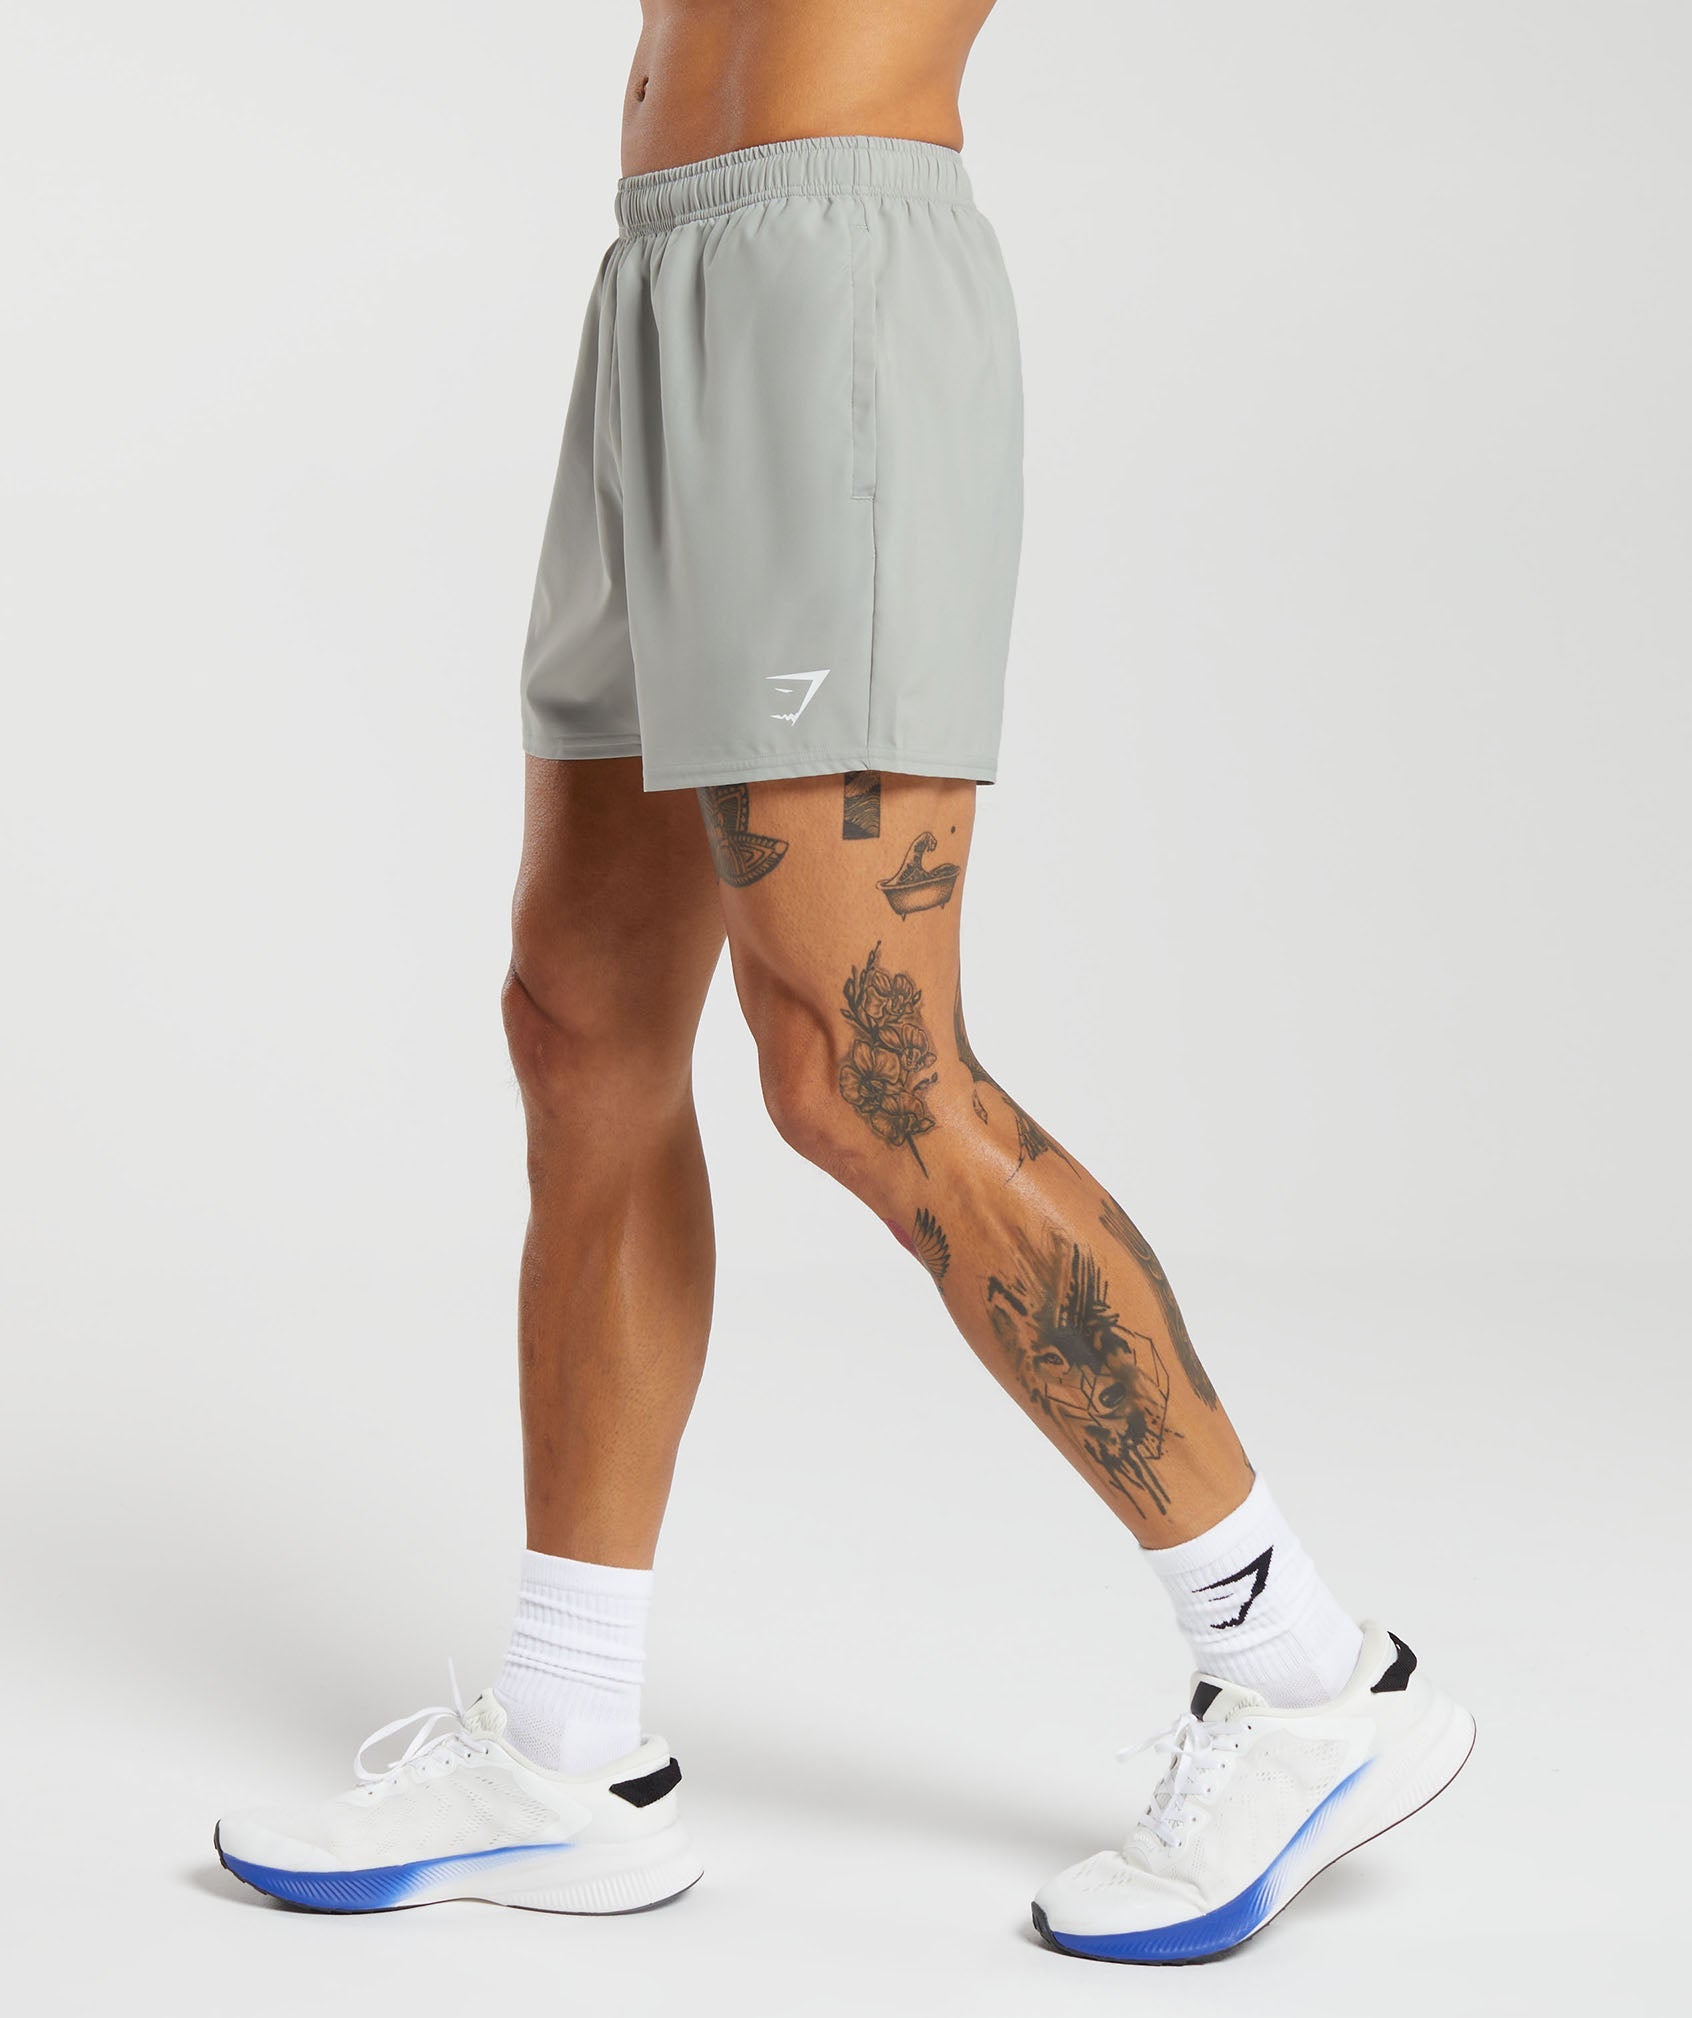 Arrival 5" Shorts product image 3